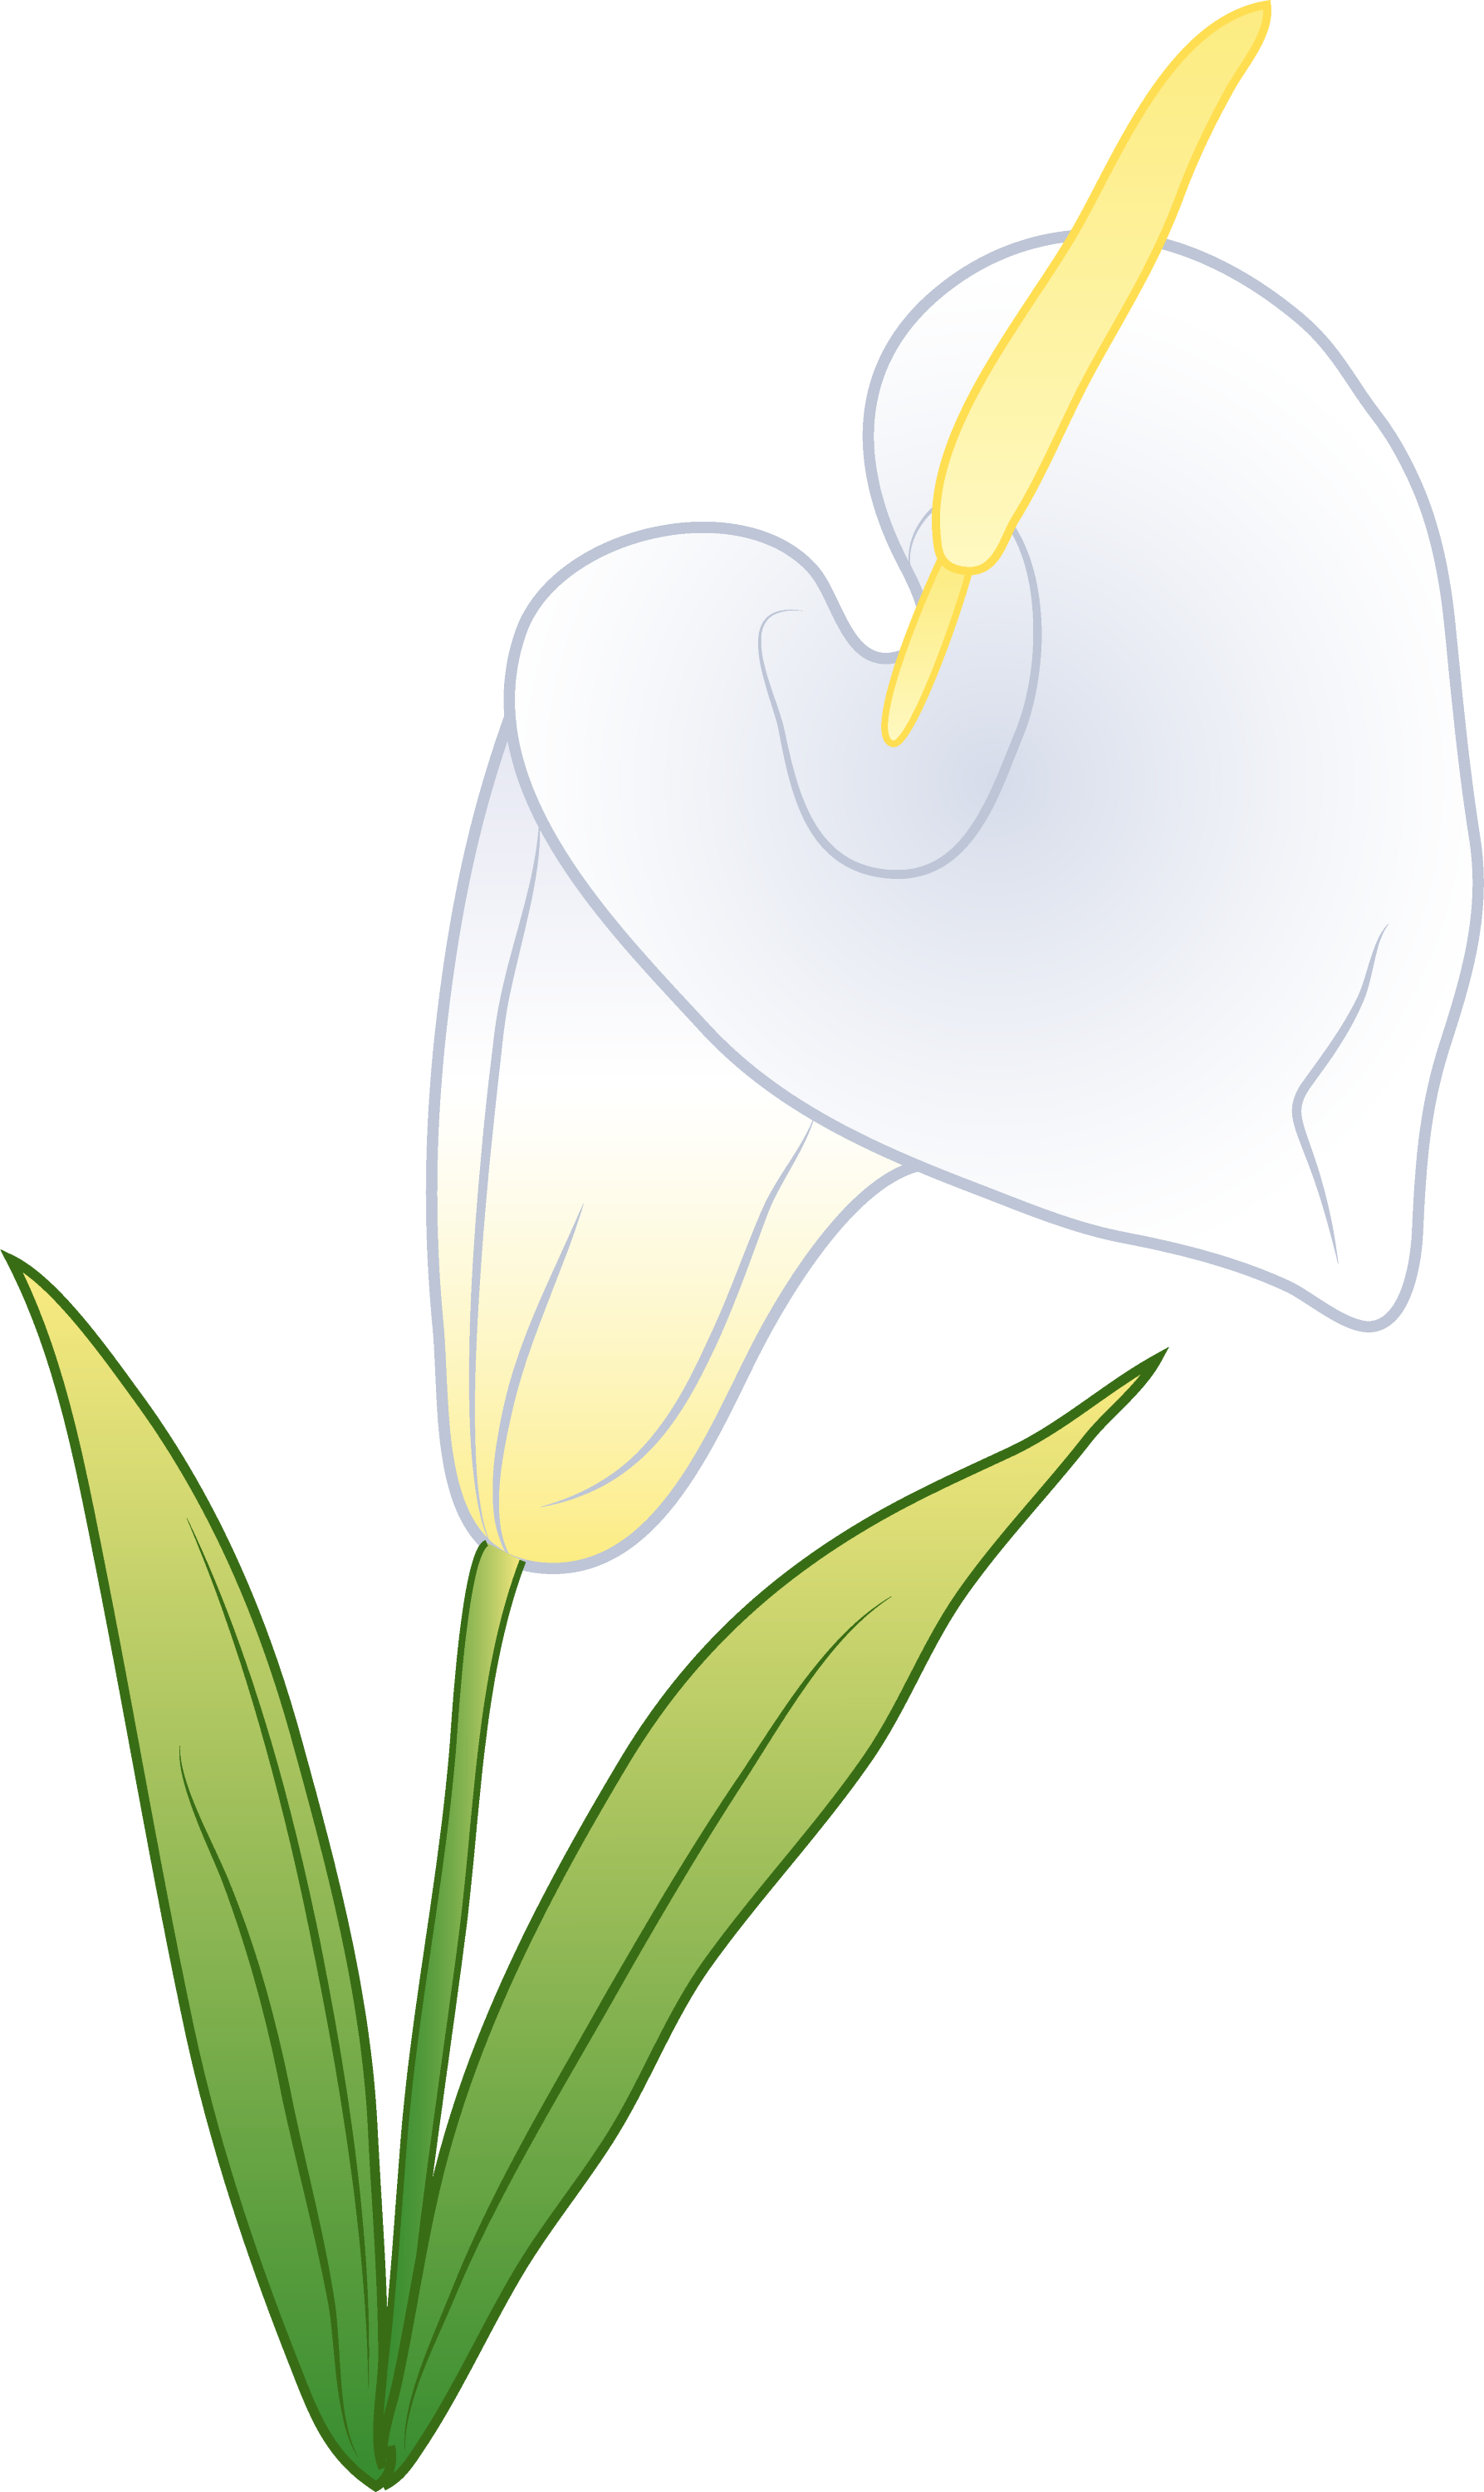 lily flower clip art free - photo #49